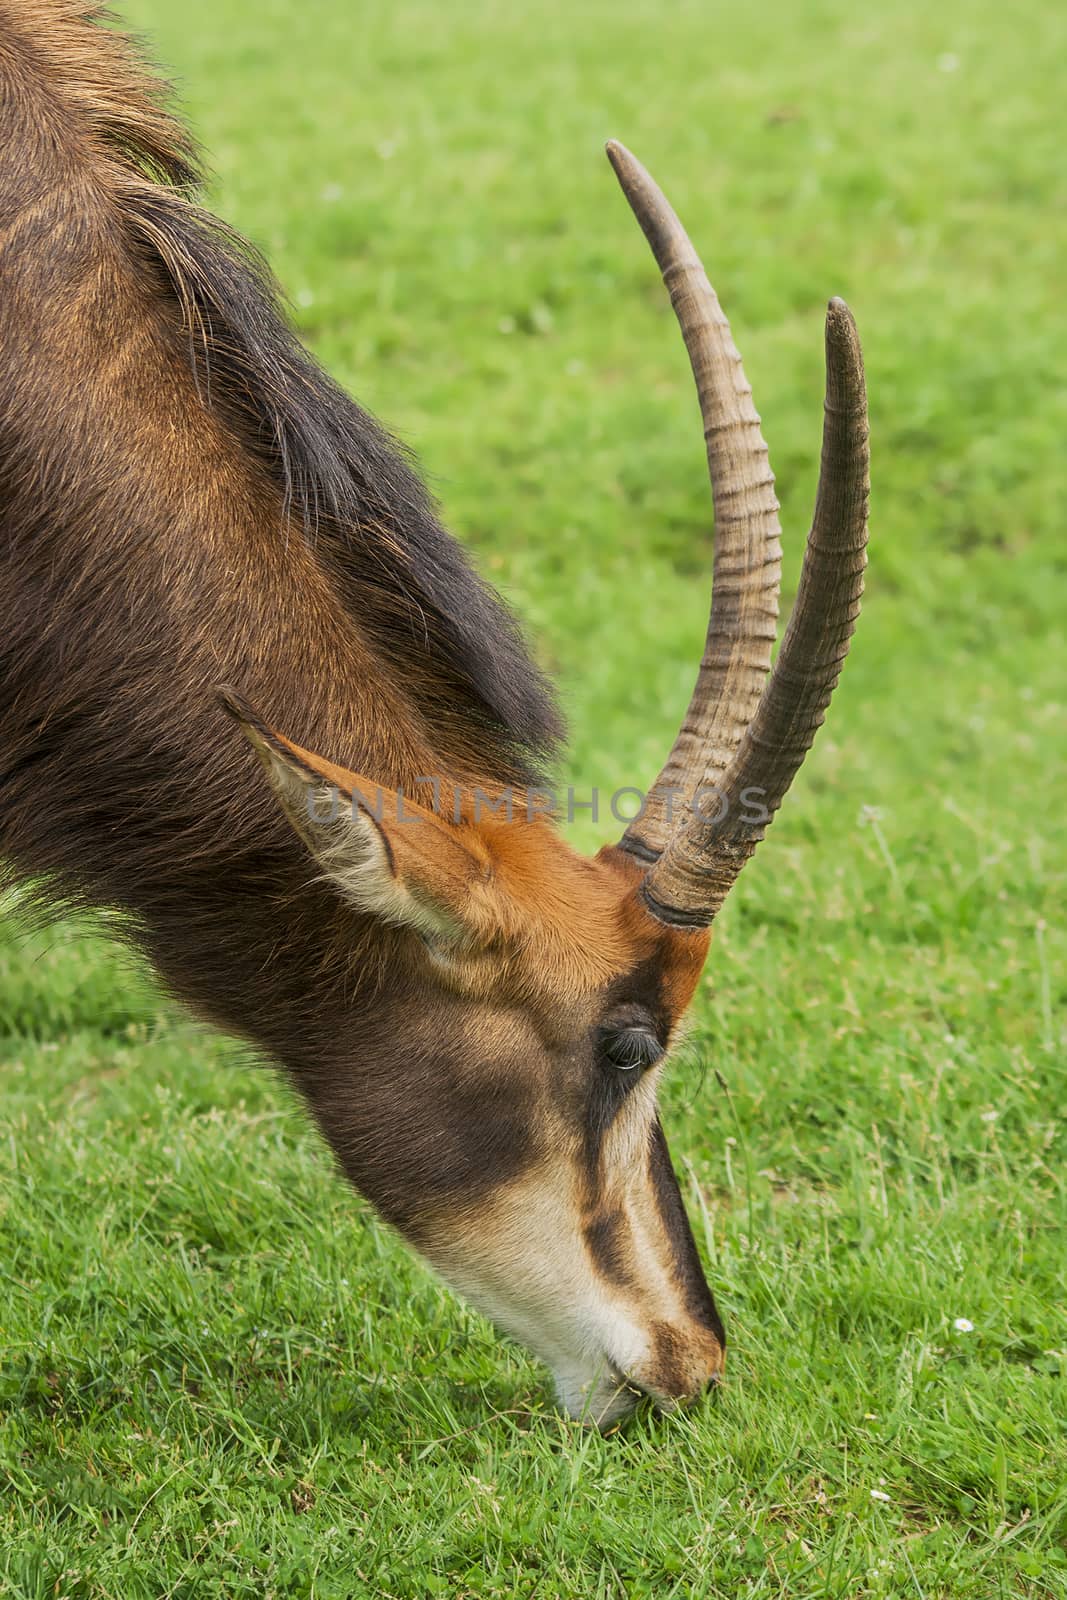 Oryx eating grass